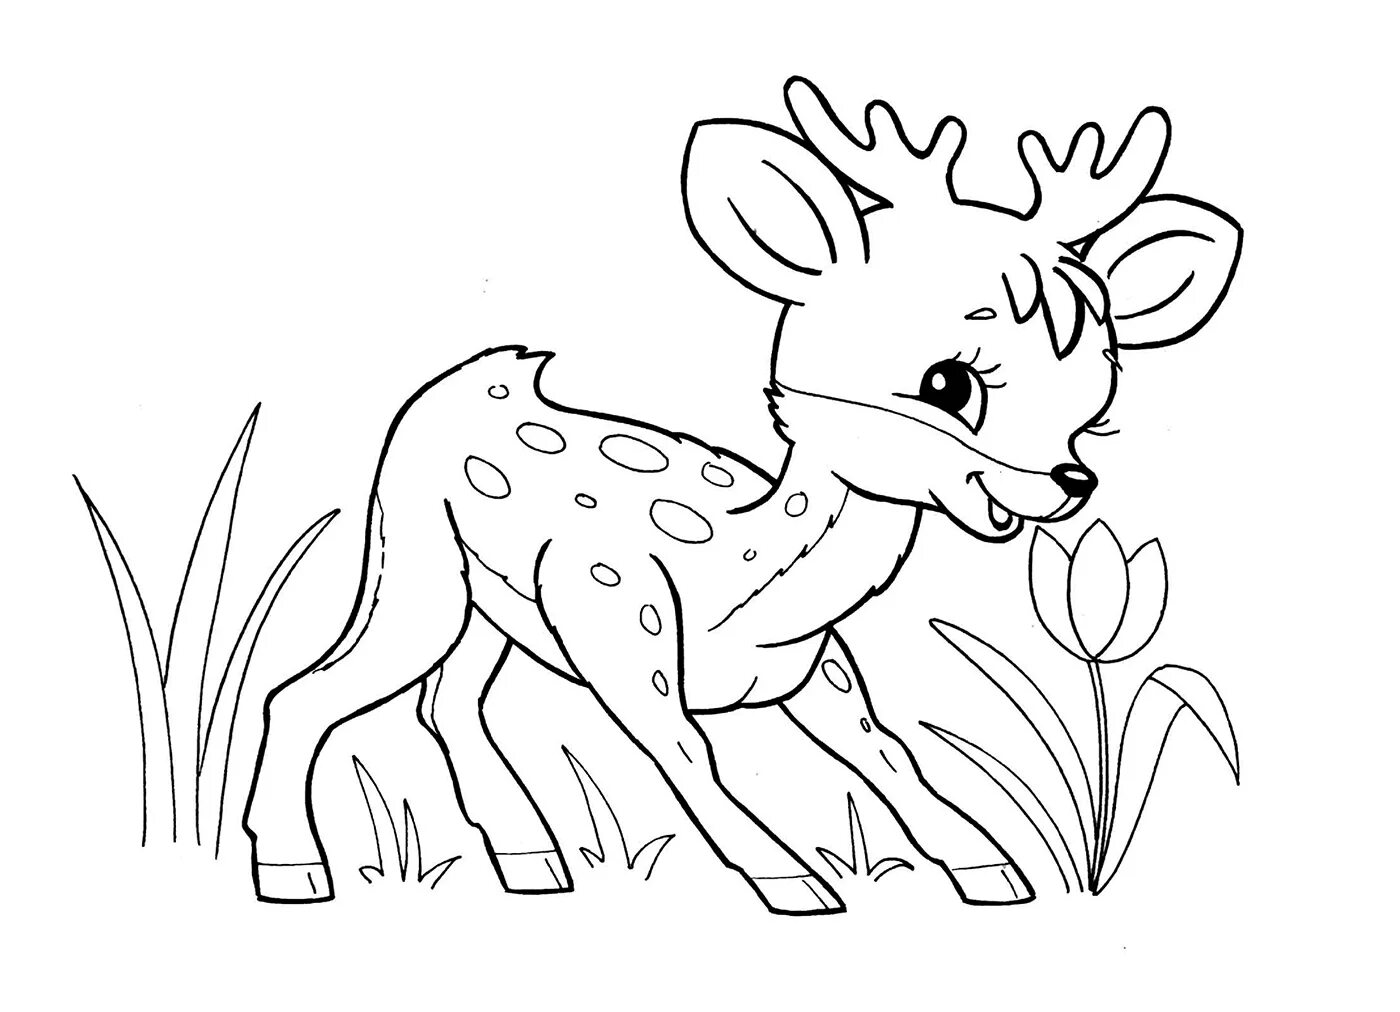 Forest animals for kids #6